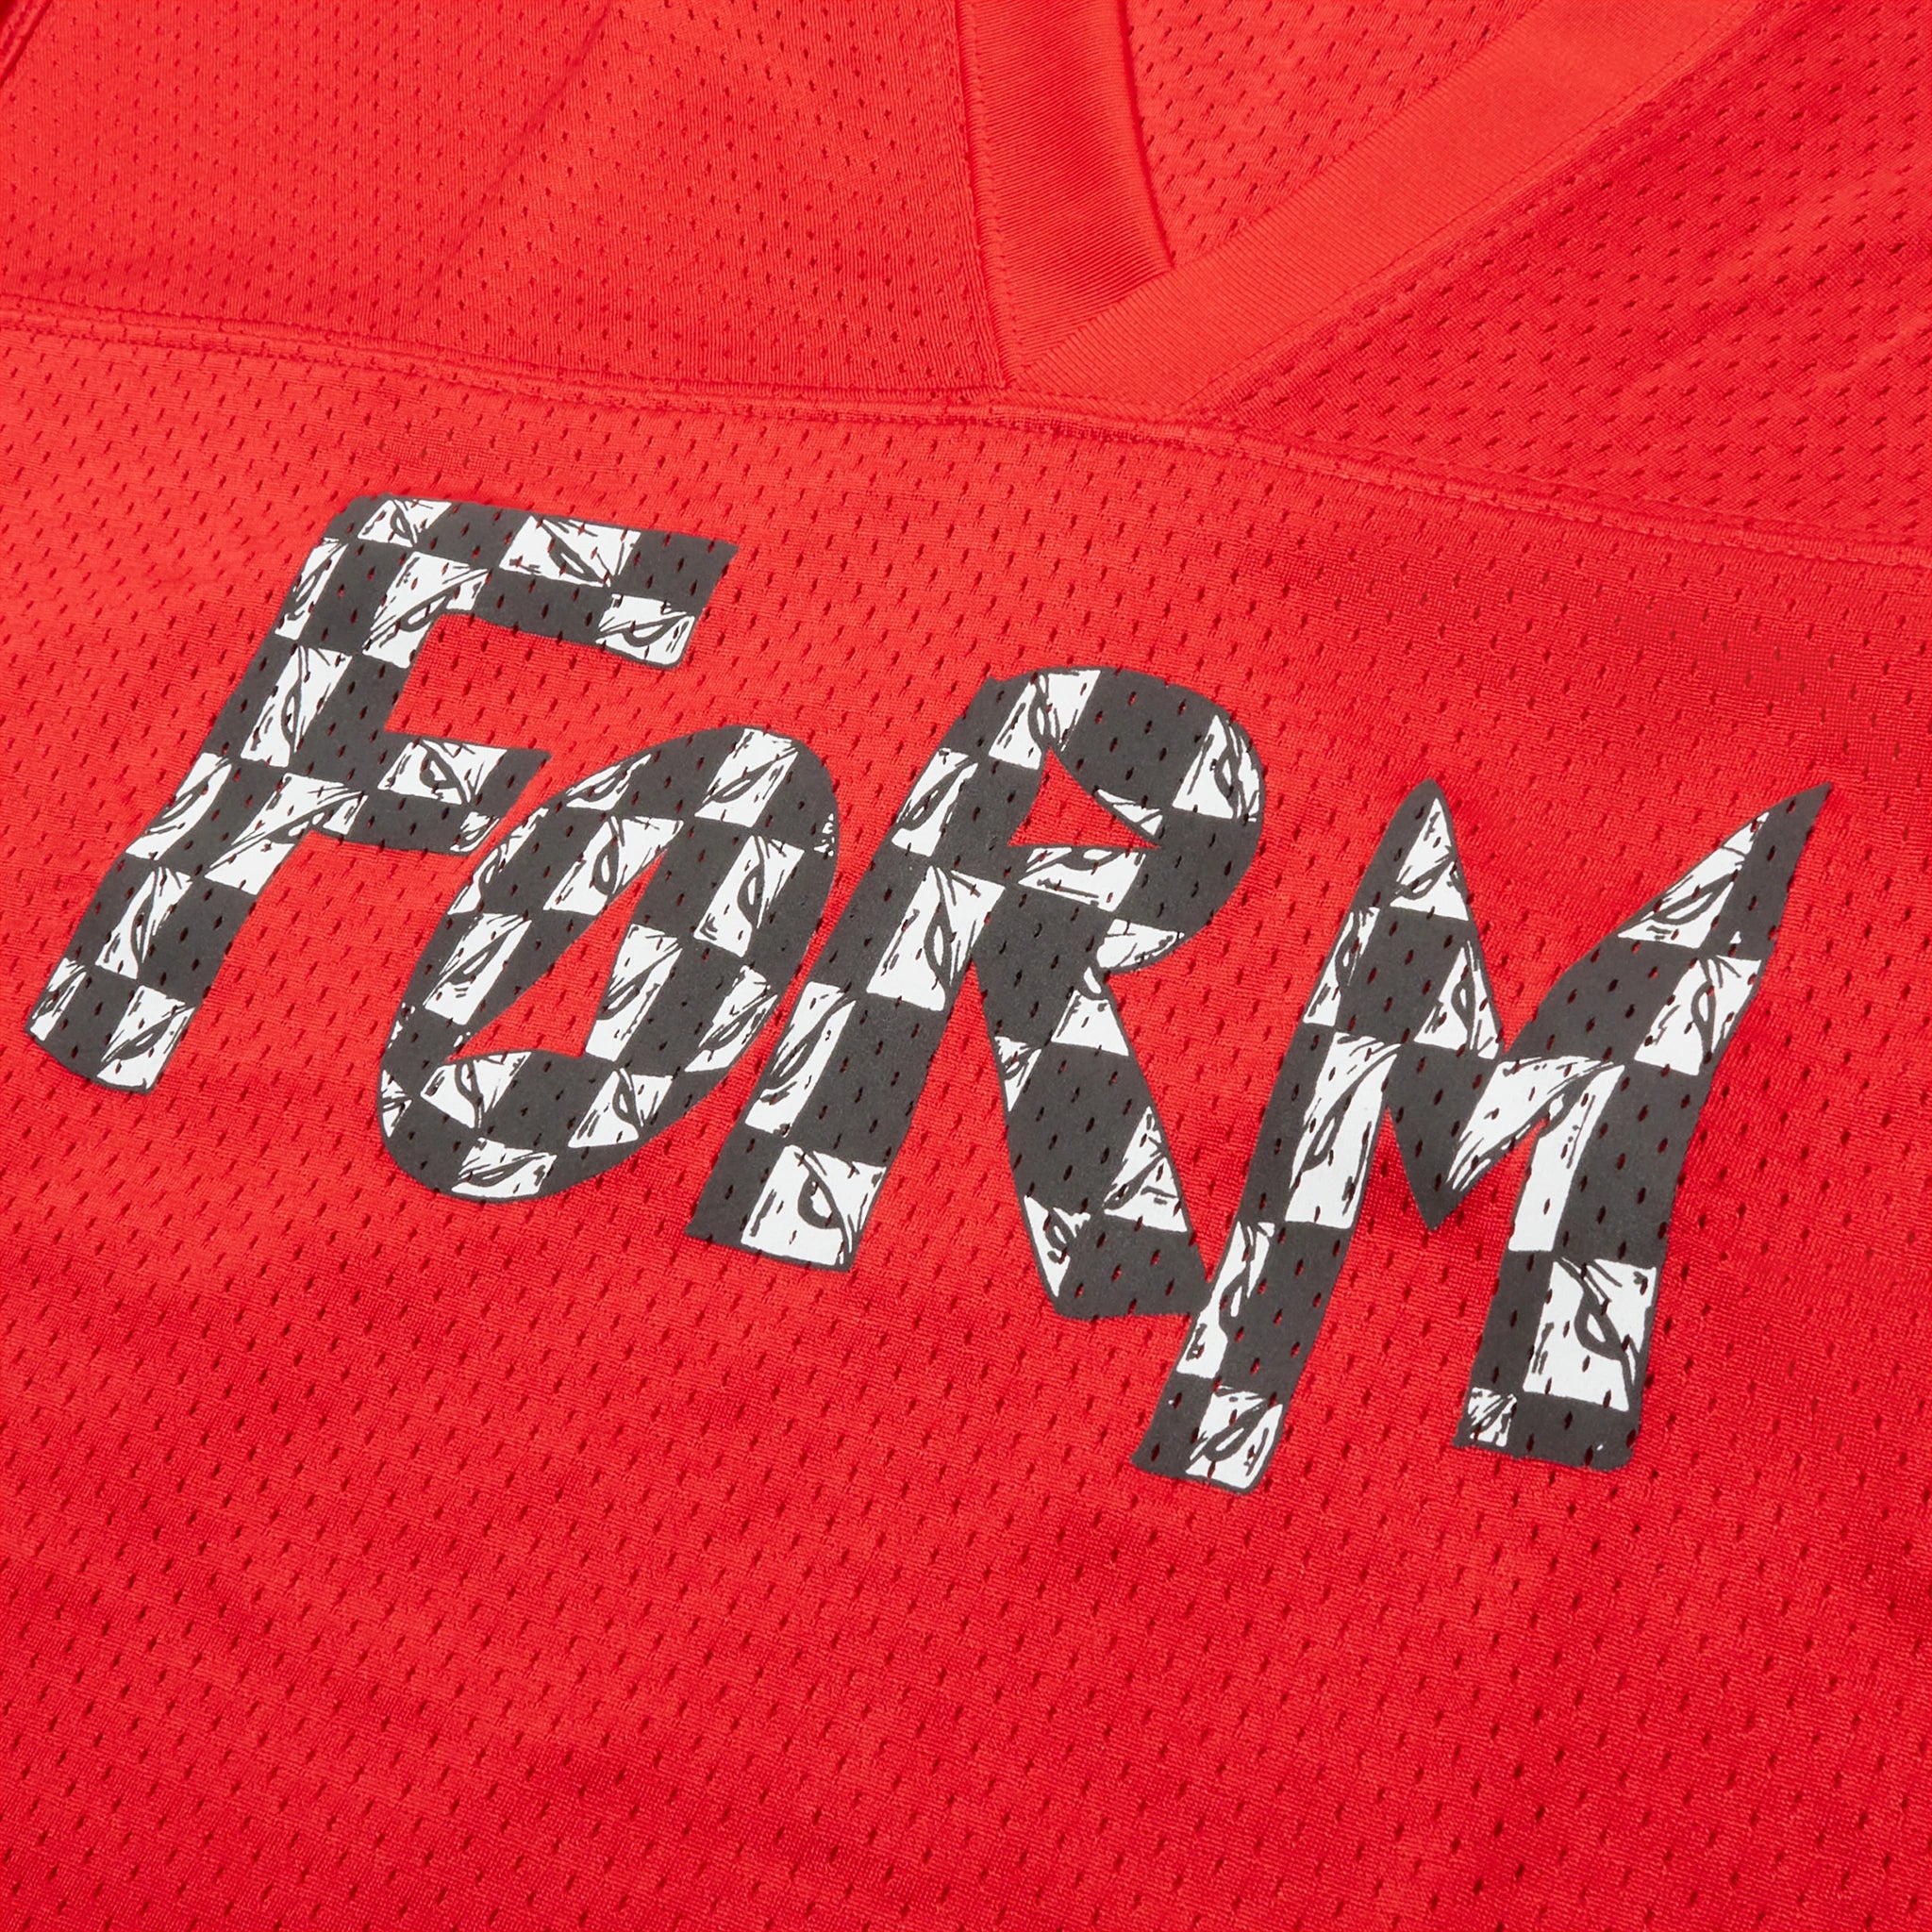 Front logo view of Chrome Hearts Stadium Mesh Red Football Jersey